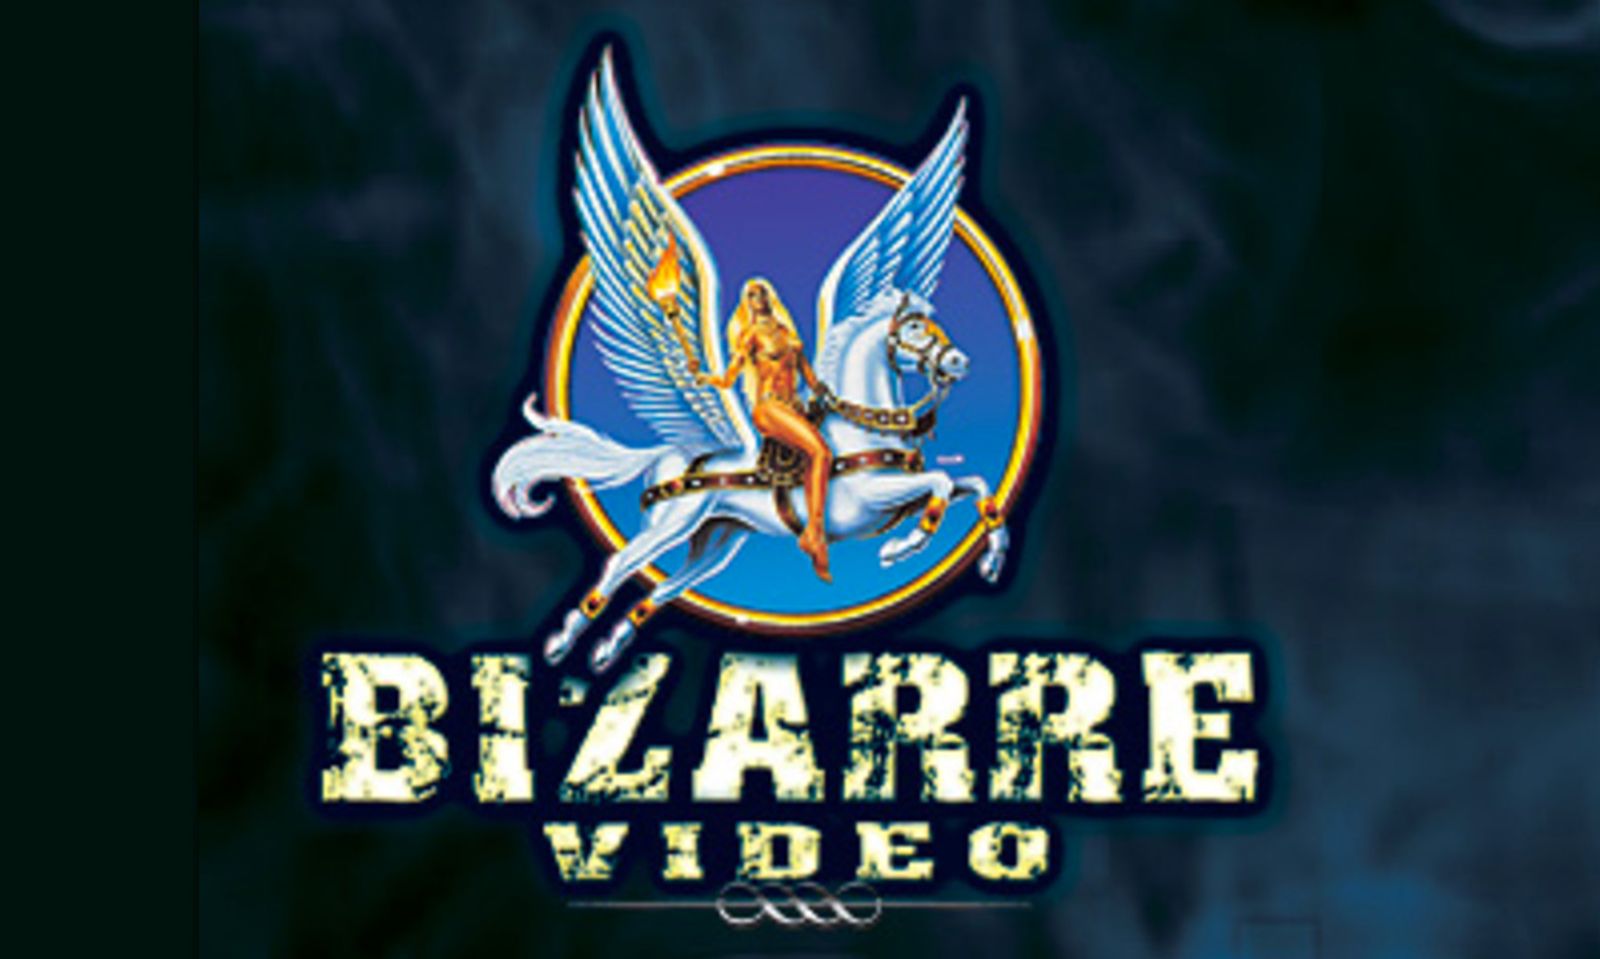 Bizarre Video to Release ‘You’re In The Army’